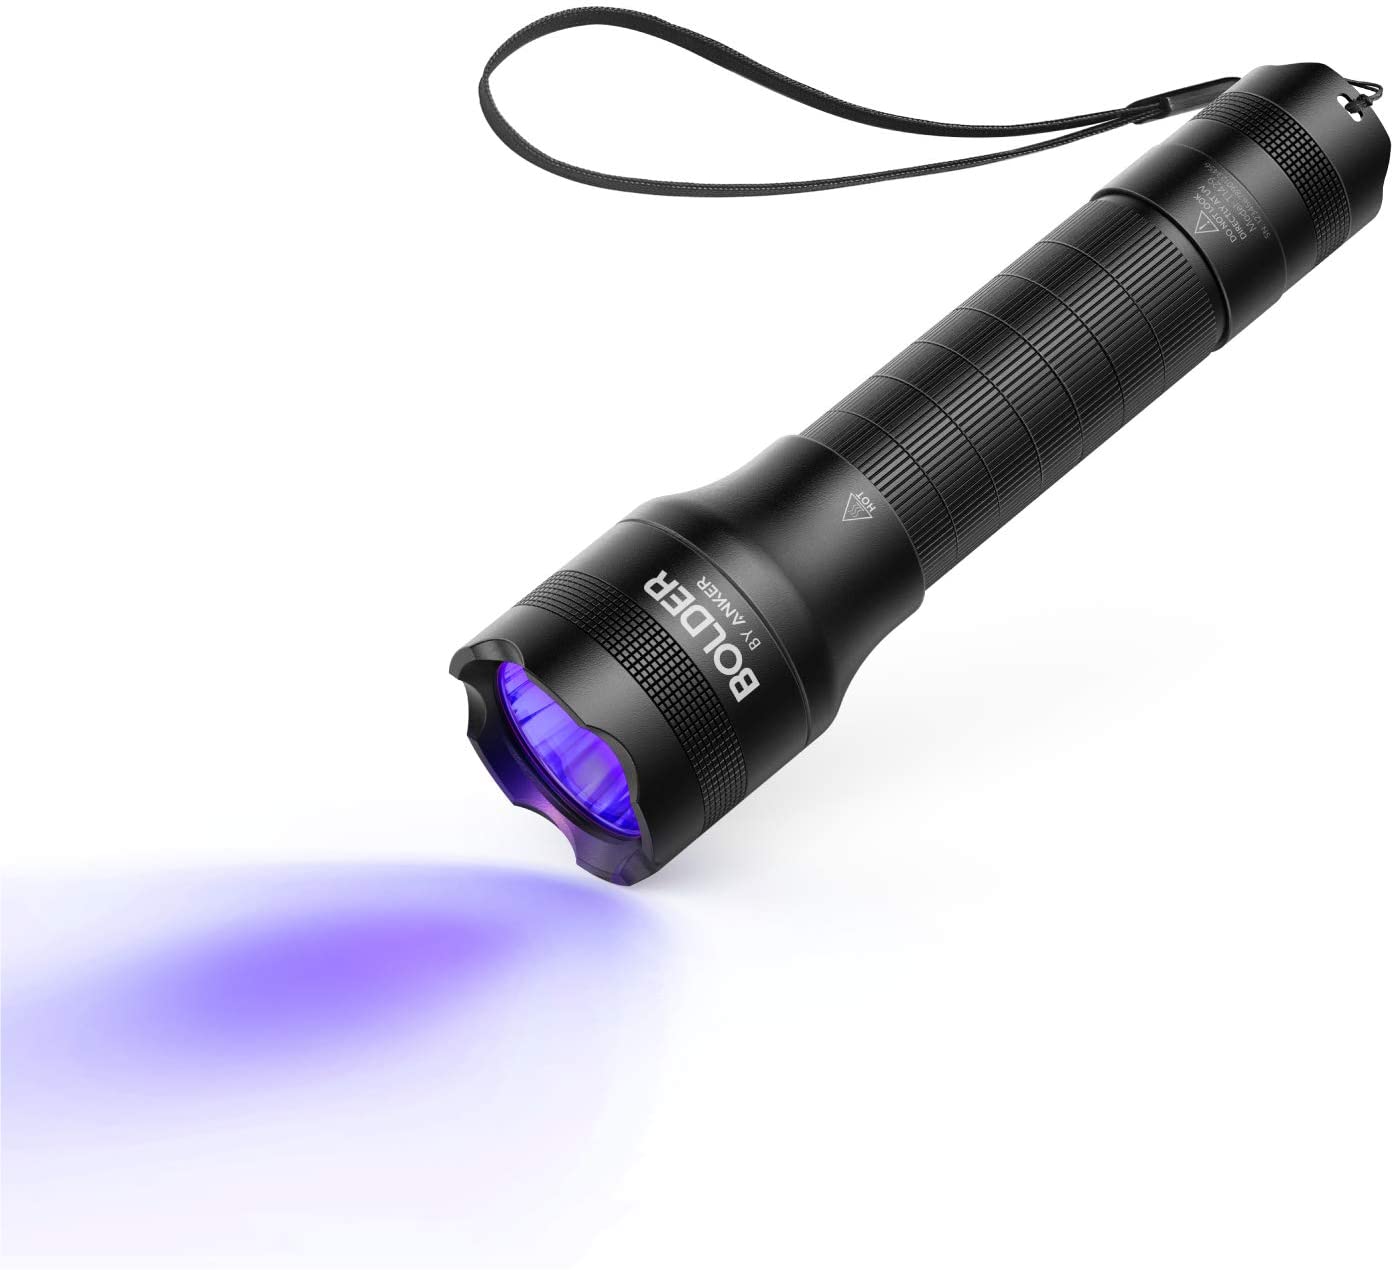 Anker Bolder UV flashlight Rechargeable,Pocket-size LED Torch, IPX5 Water Resistant, 18650 Battery Included $15.99 w/ Free Prime Shipping